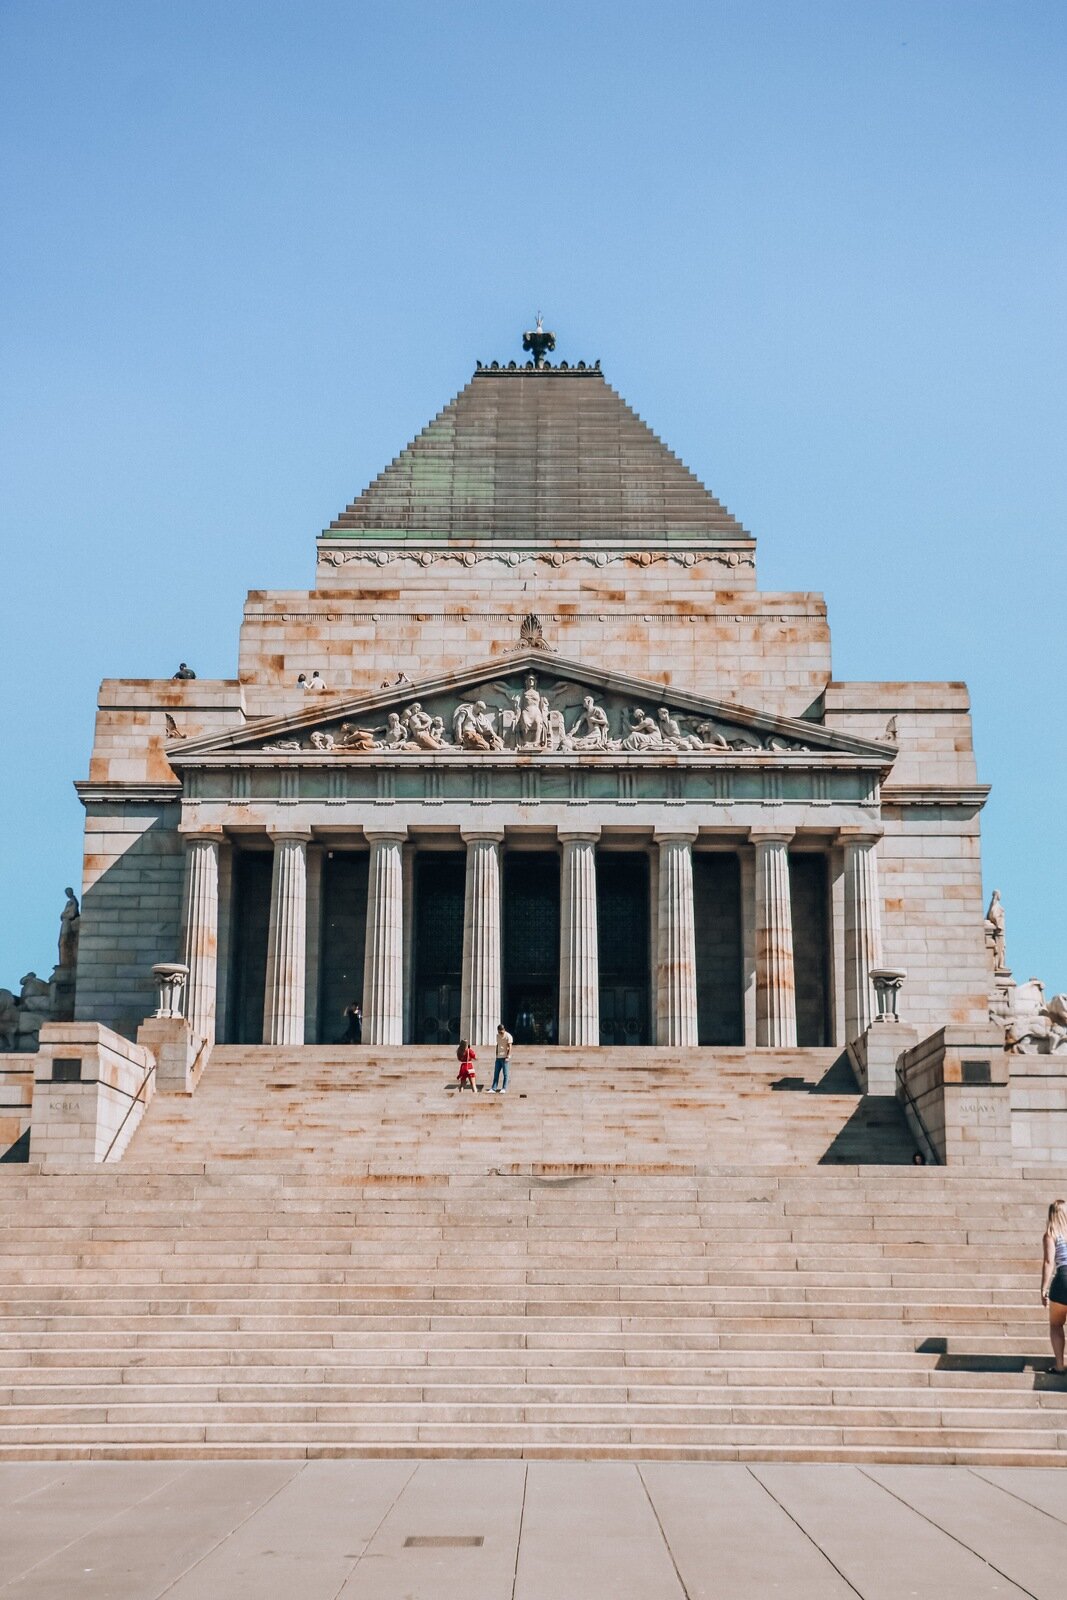 The Shrine of Remembrance in Melbourne